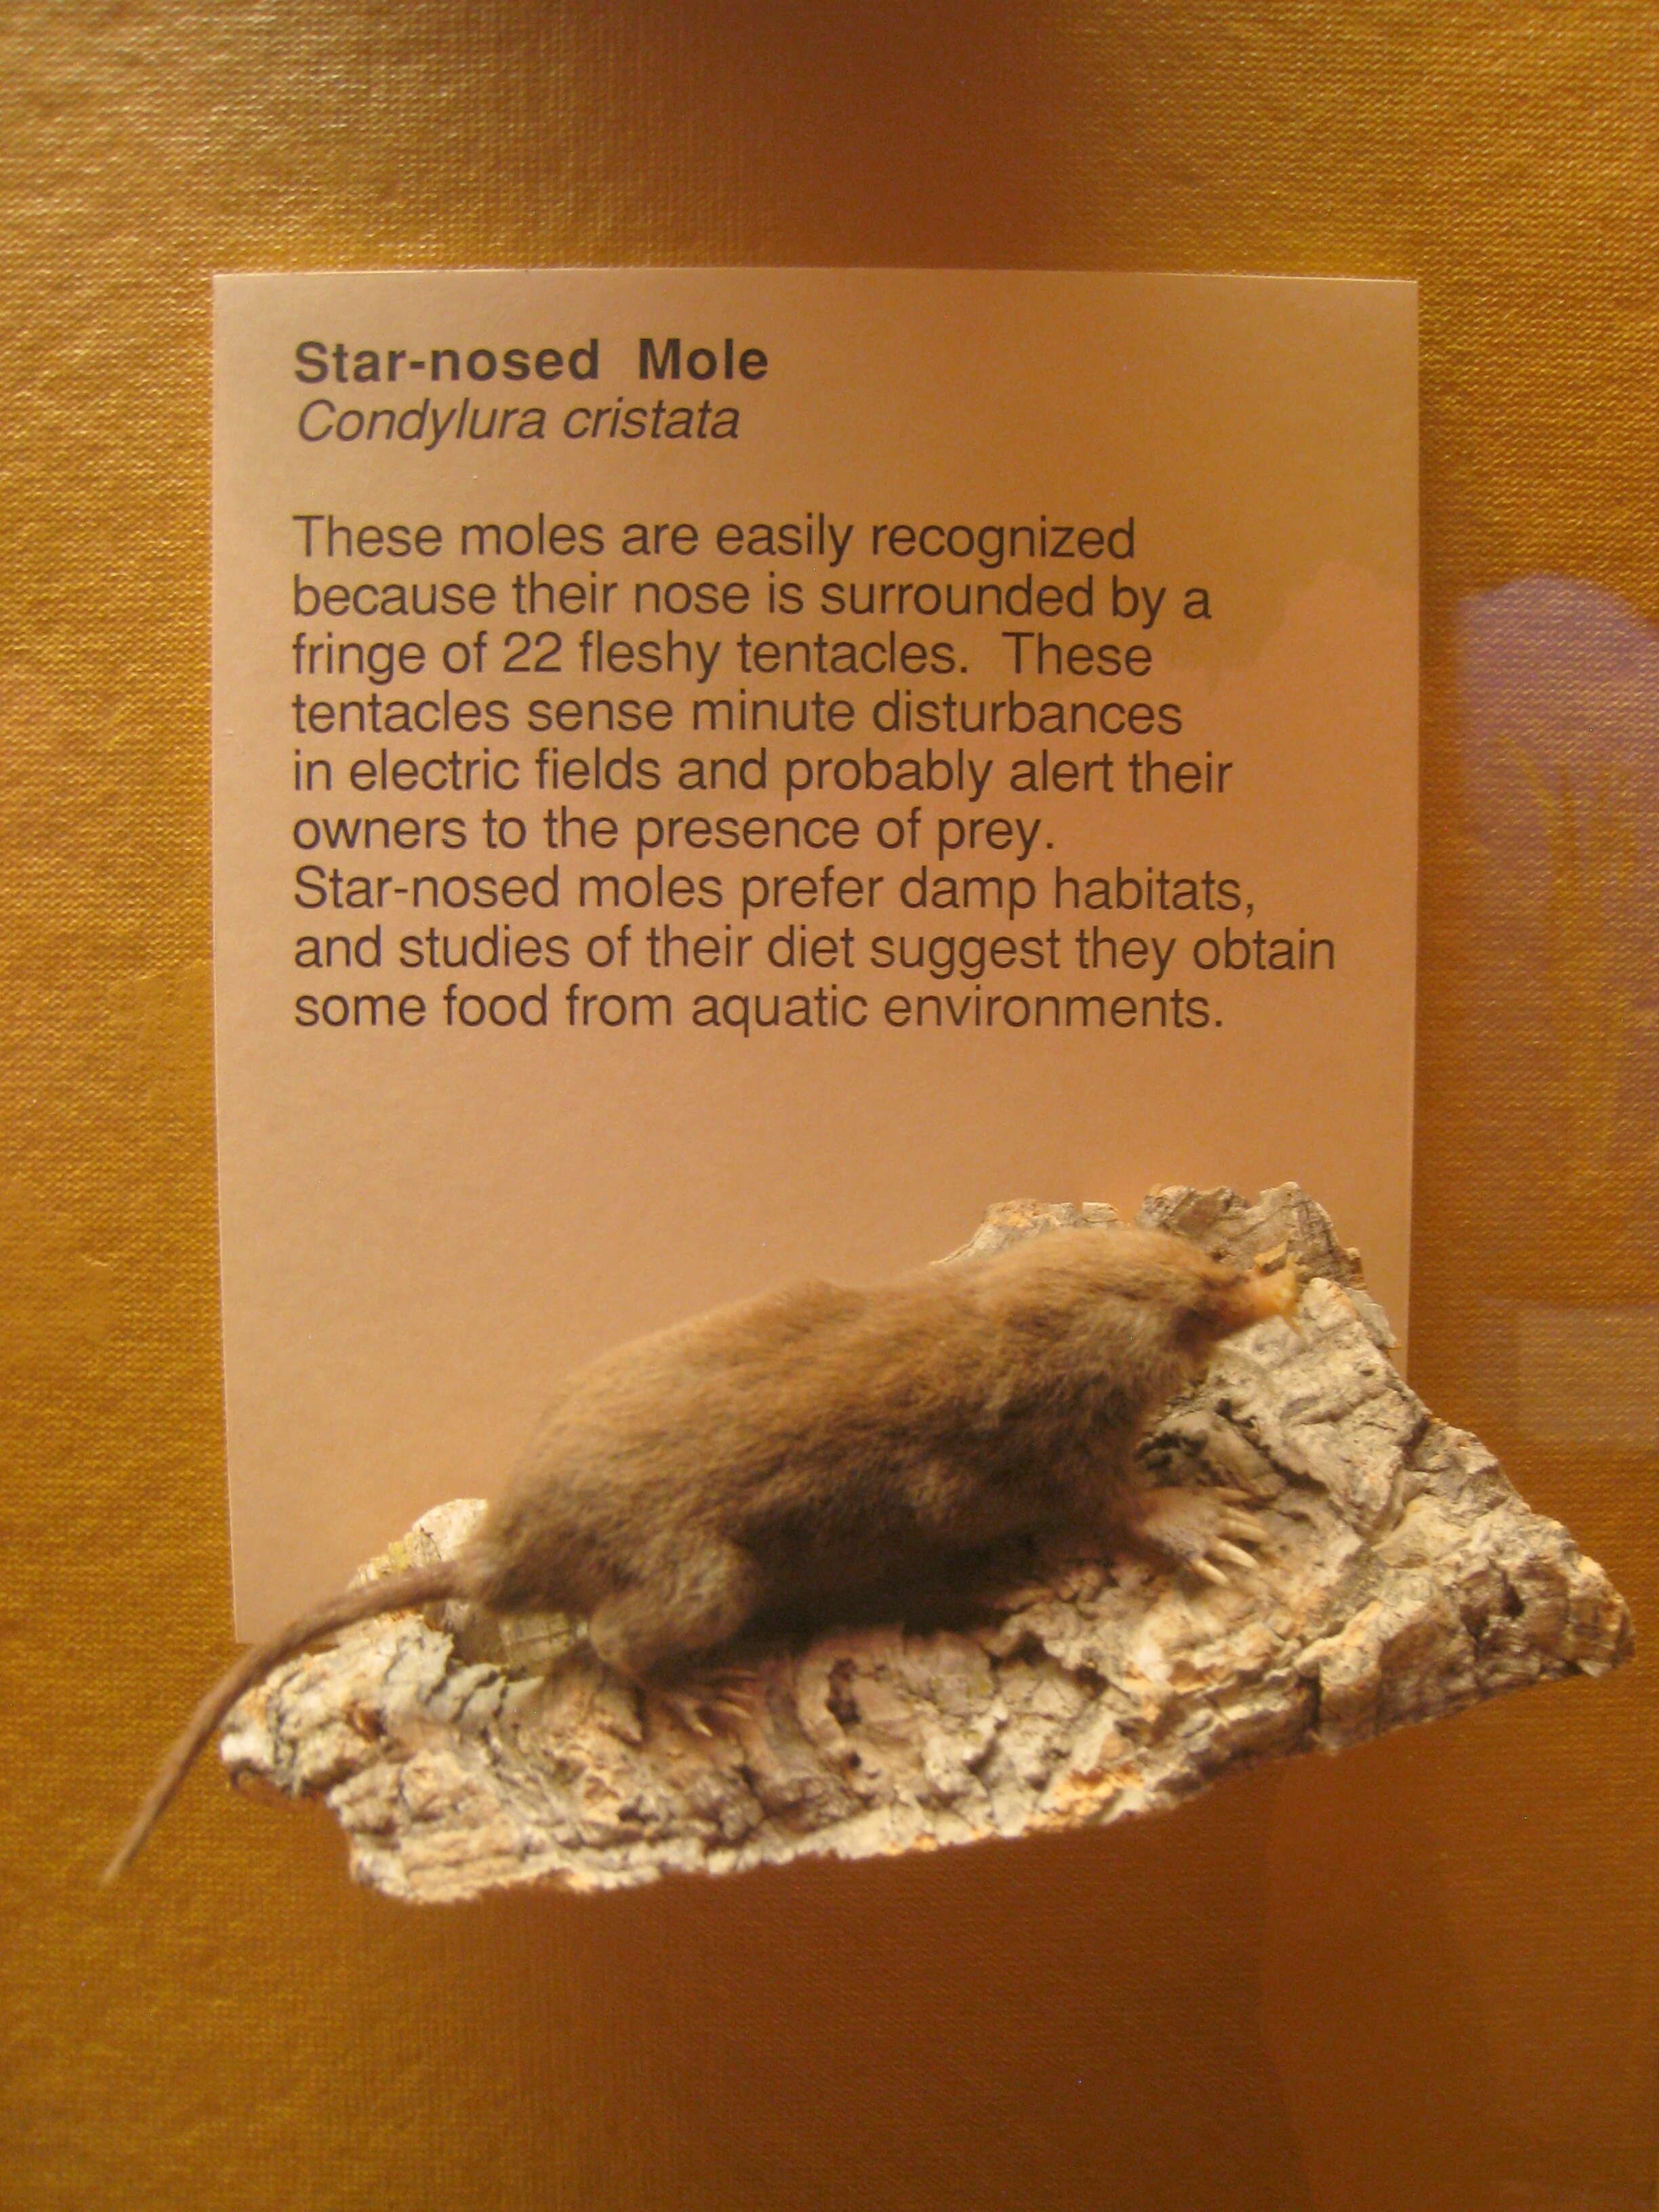 Image of desmans, moles, and relatives